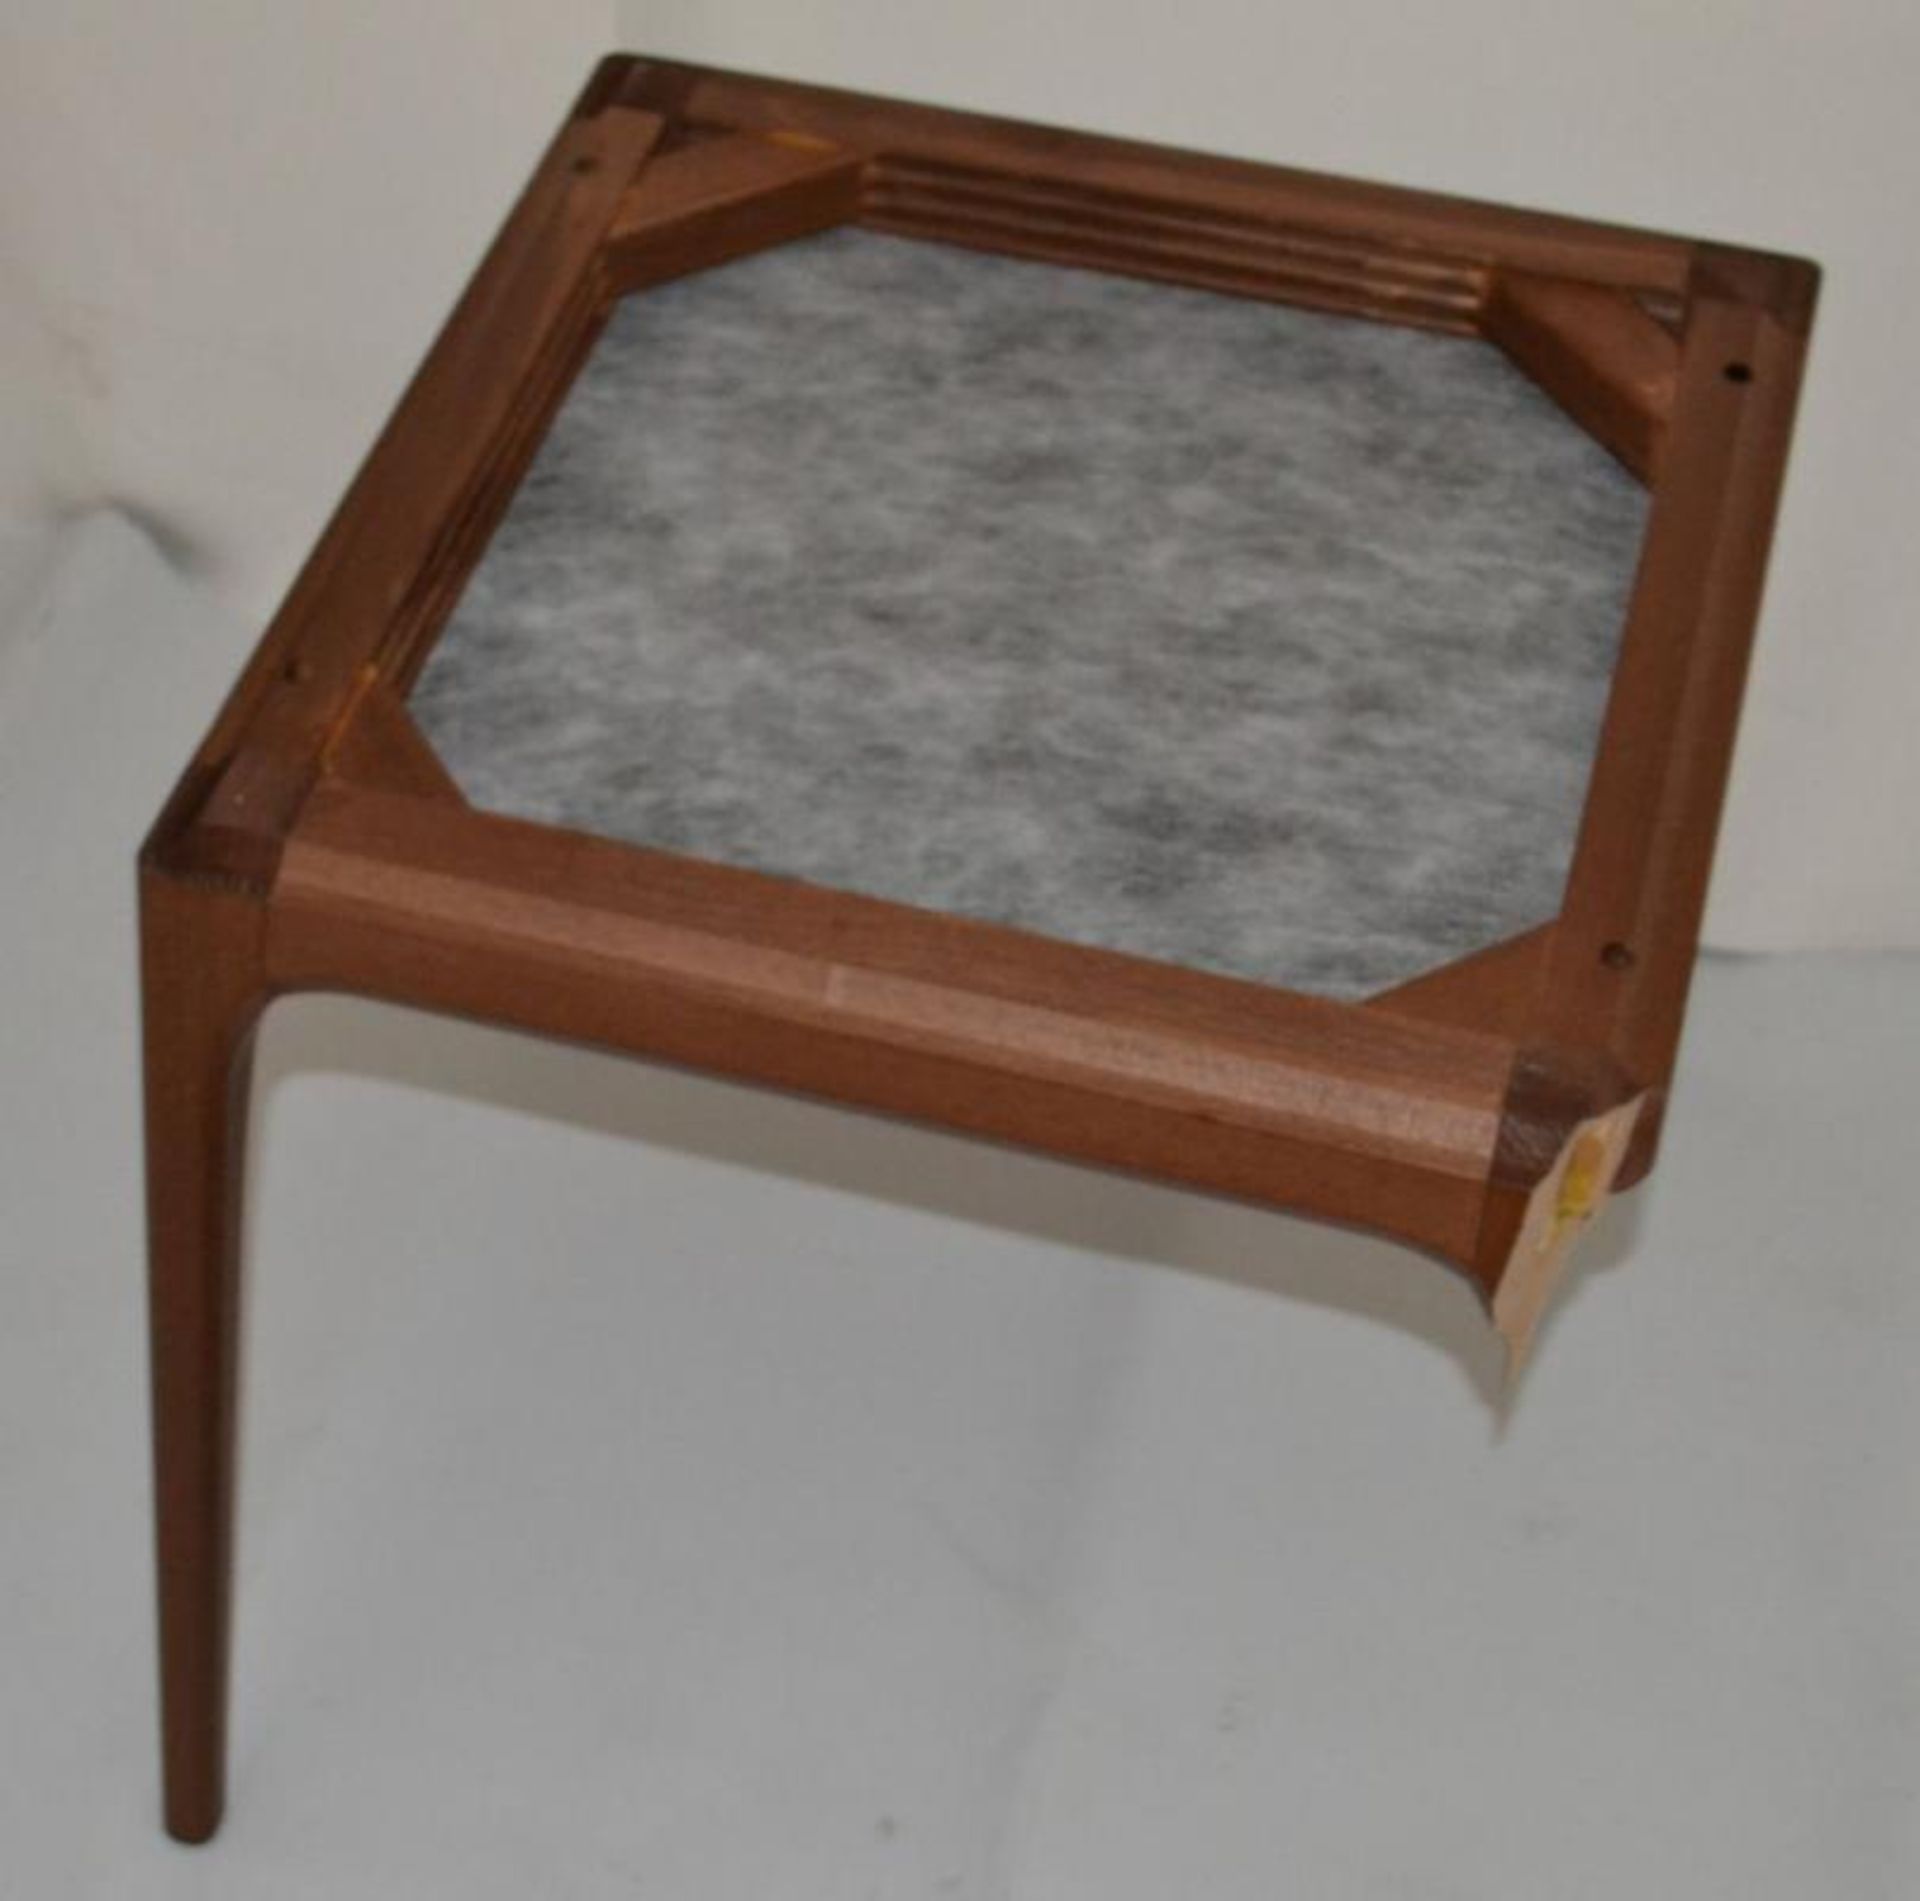 1 x ROSET Calin Chair Frame Only - Ref: 5422827 P2/17 - CL087 - Location: Altrincham WA14<br / - Image 19 of 30